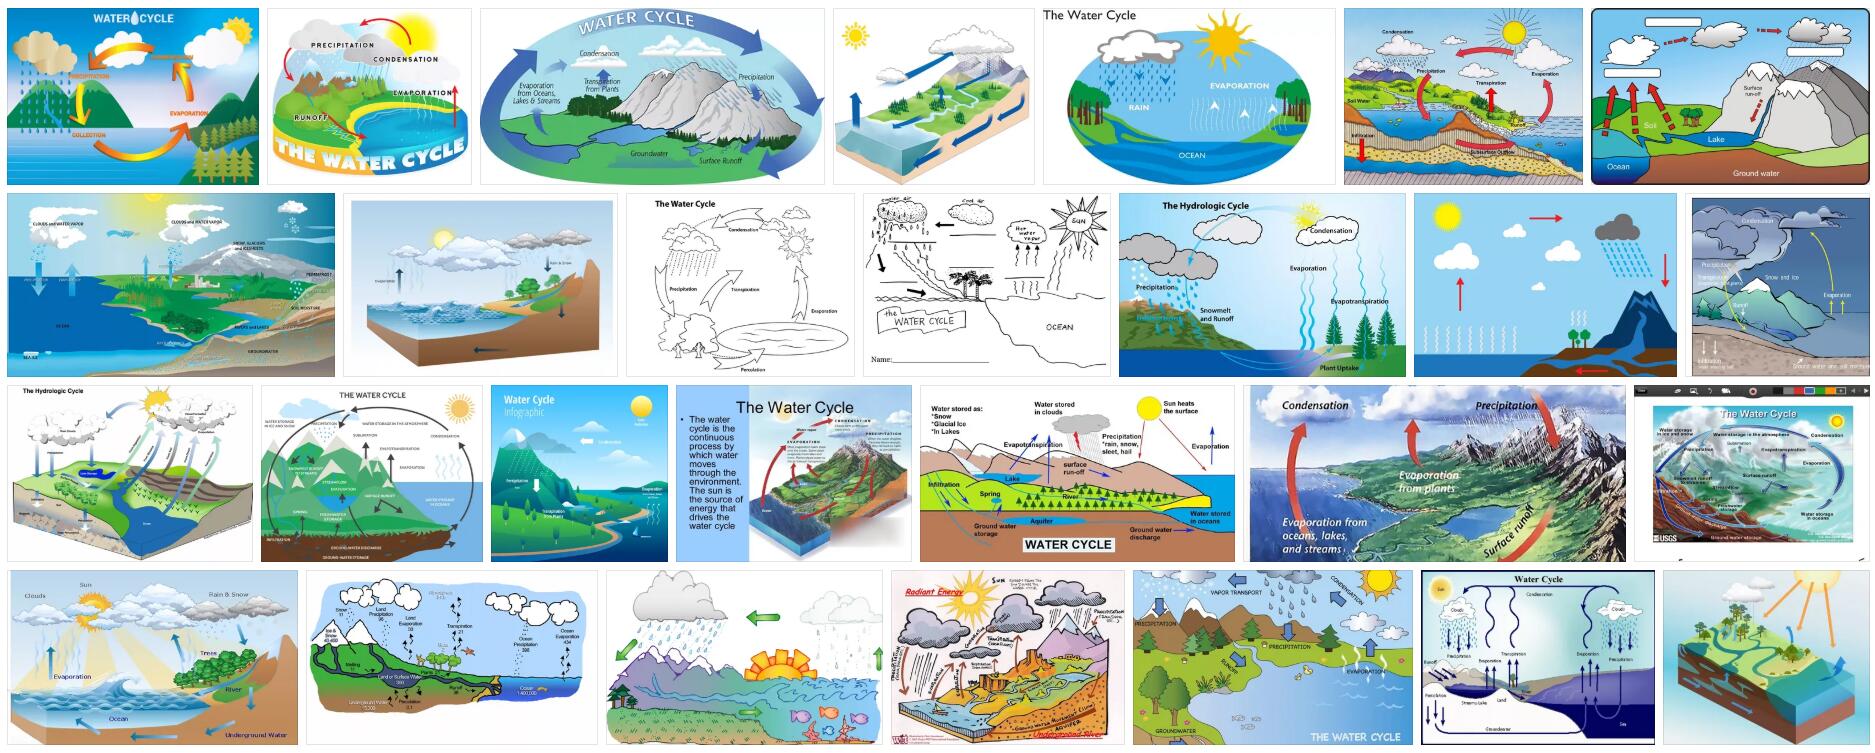 Water Cycle Definition and Meaning